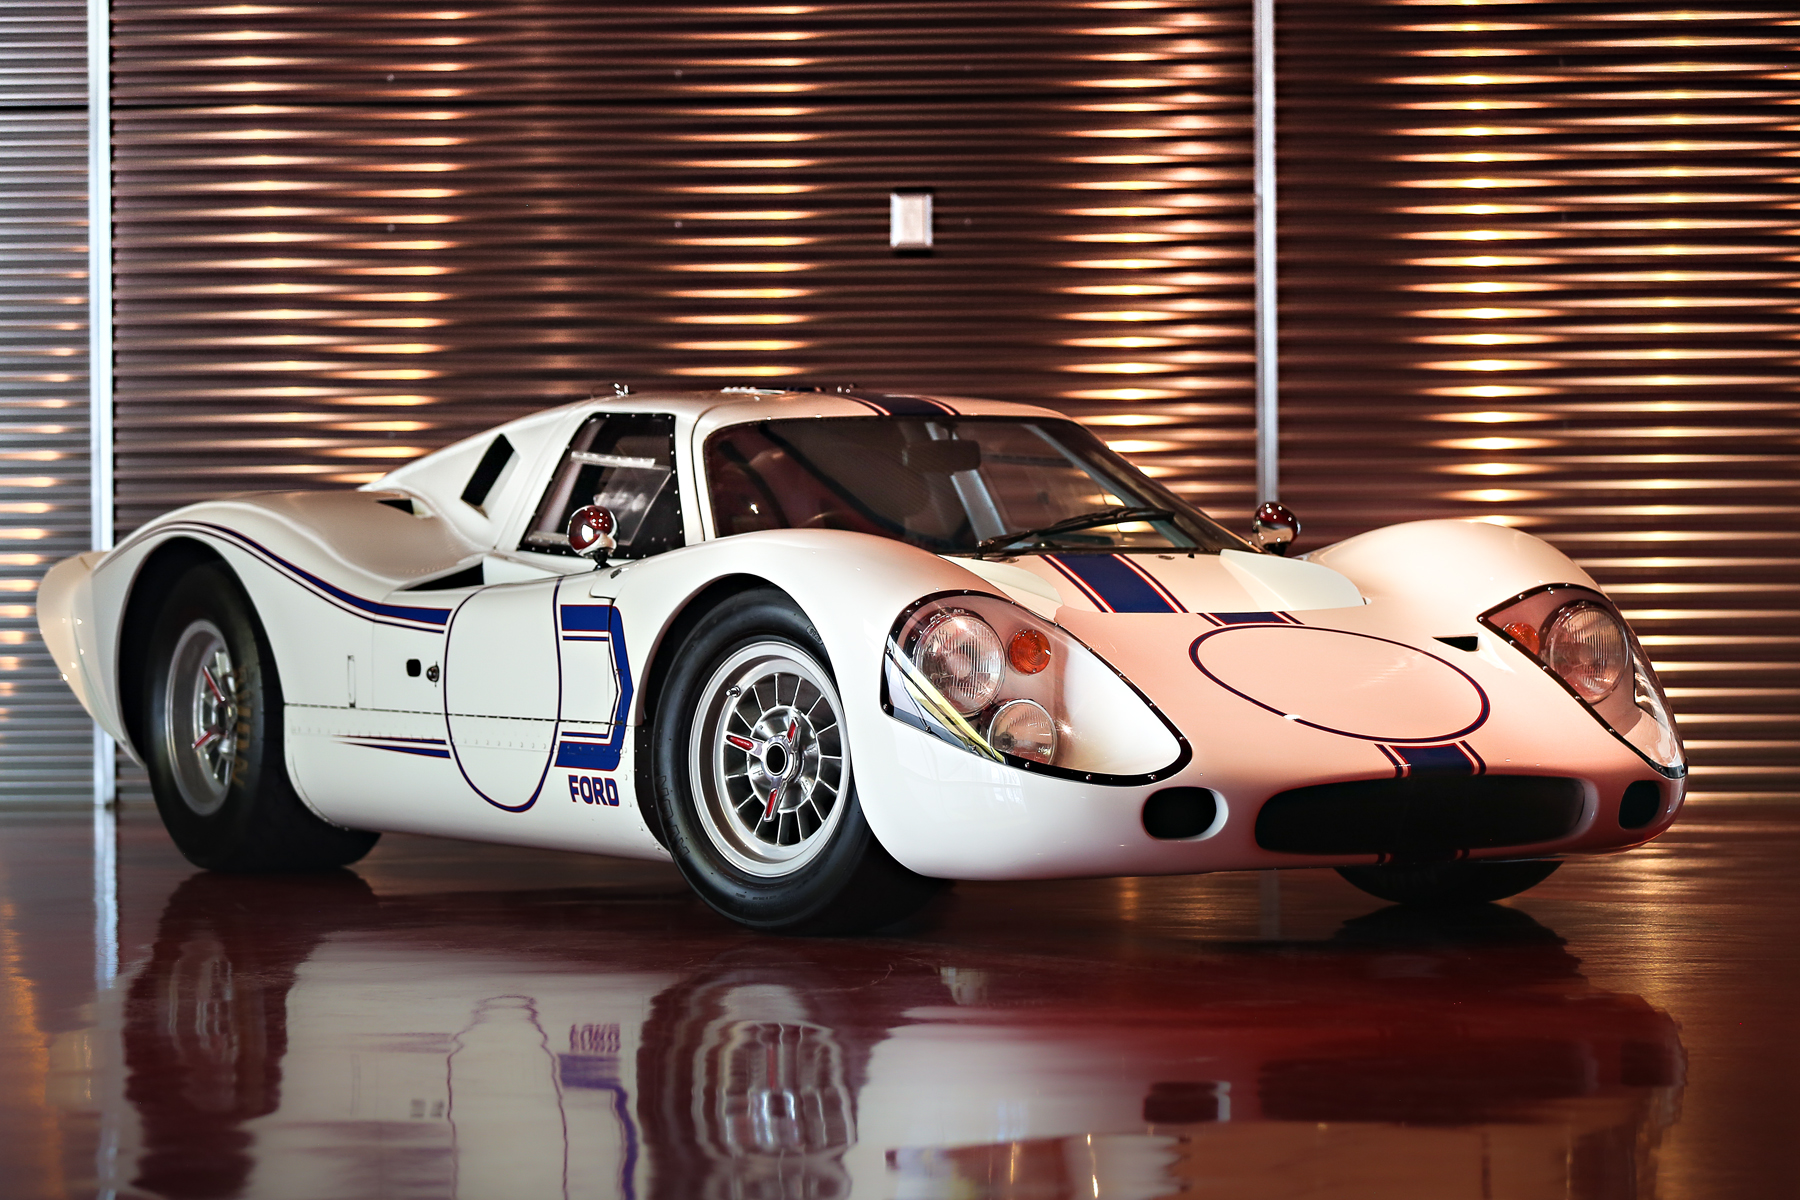 The Last Period Built Chassis GT40 Mk IV Heads To Auction. Hemmings